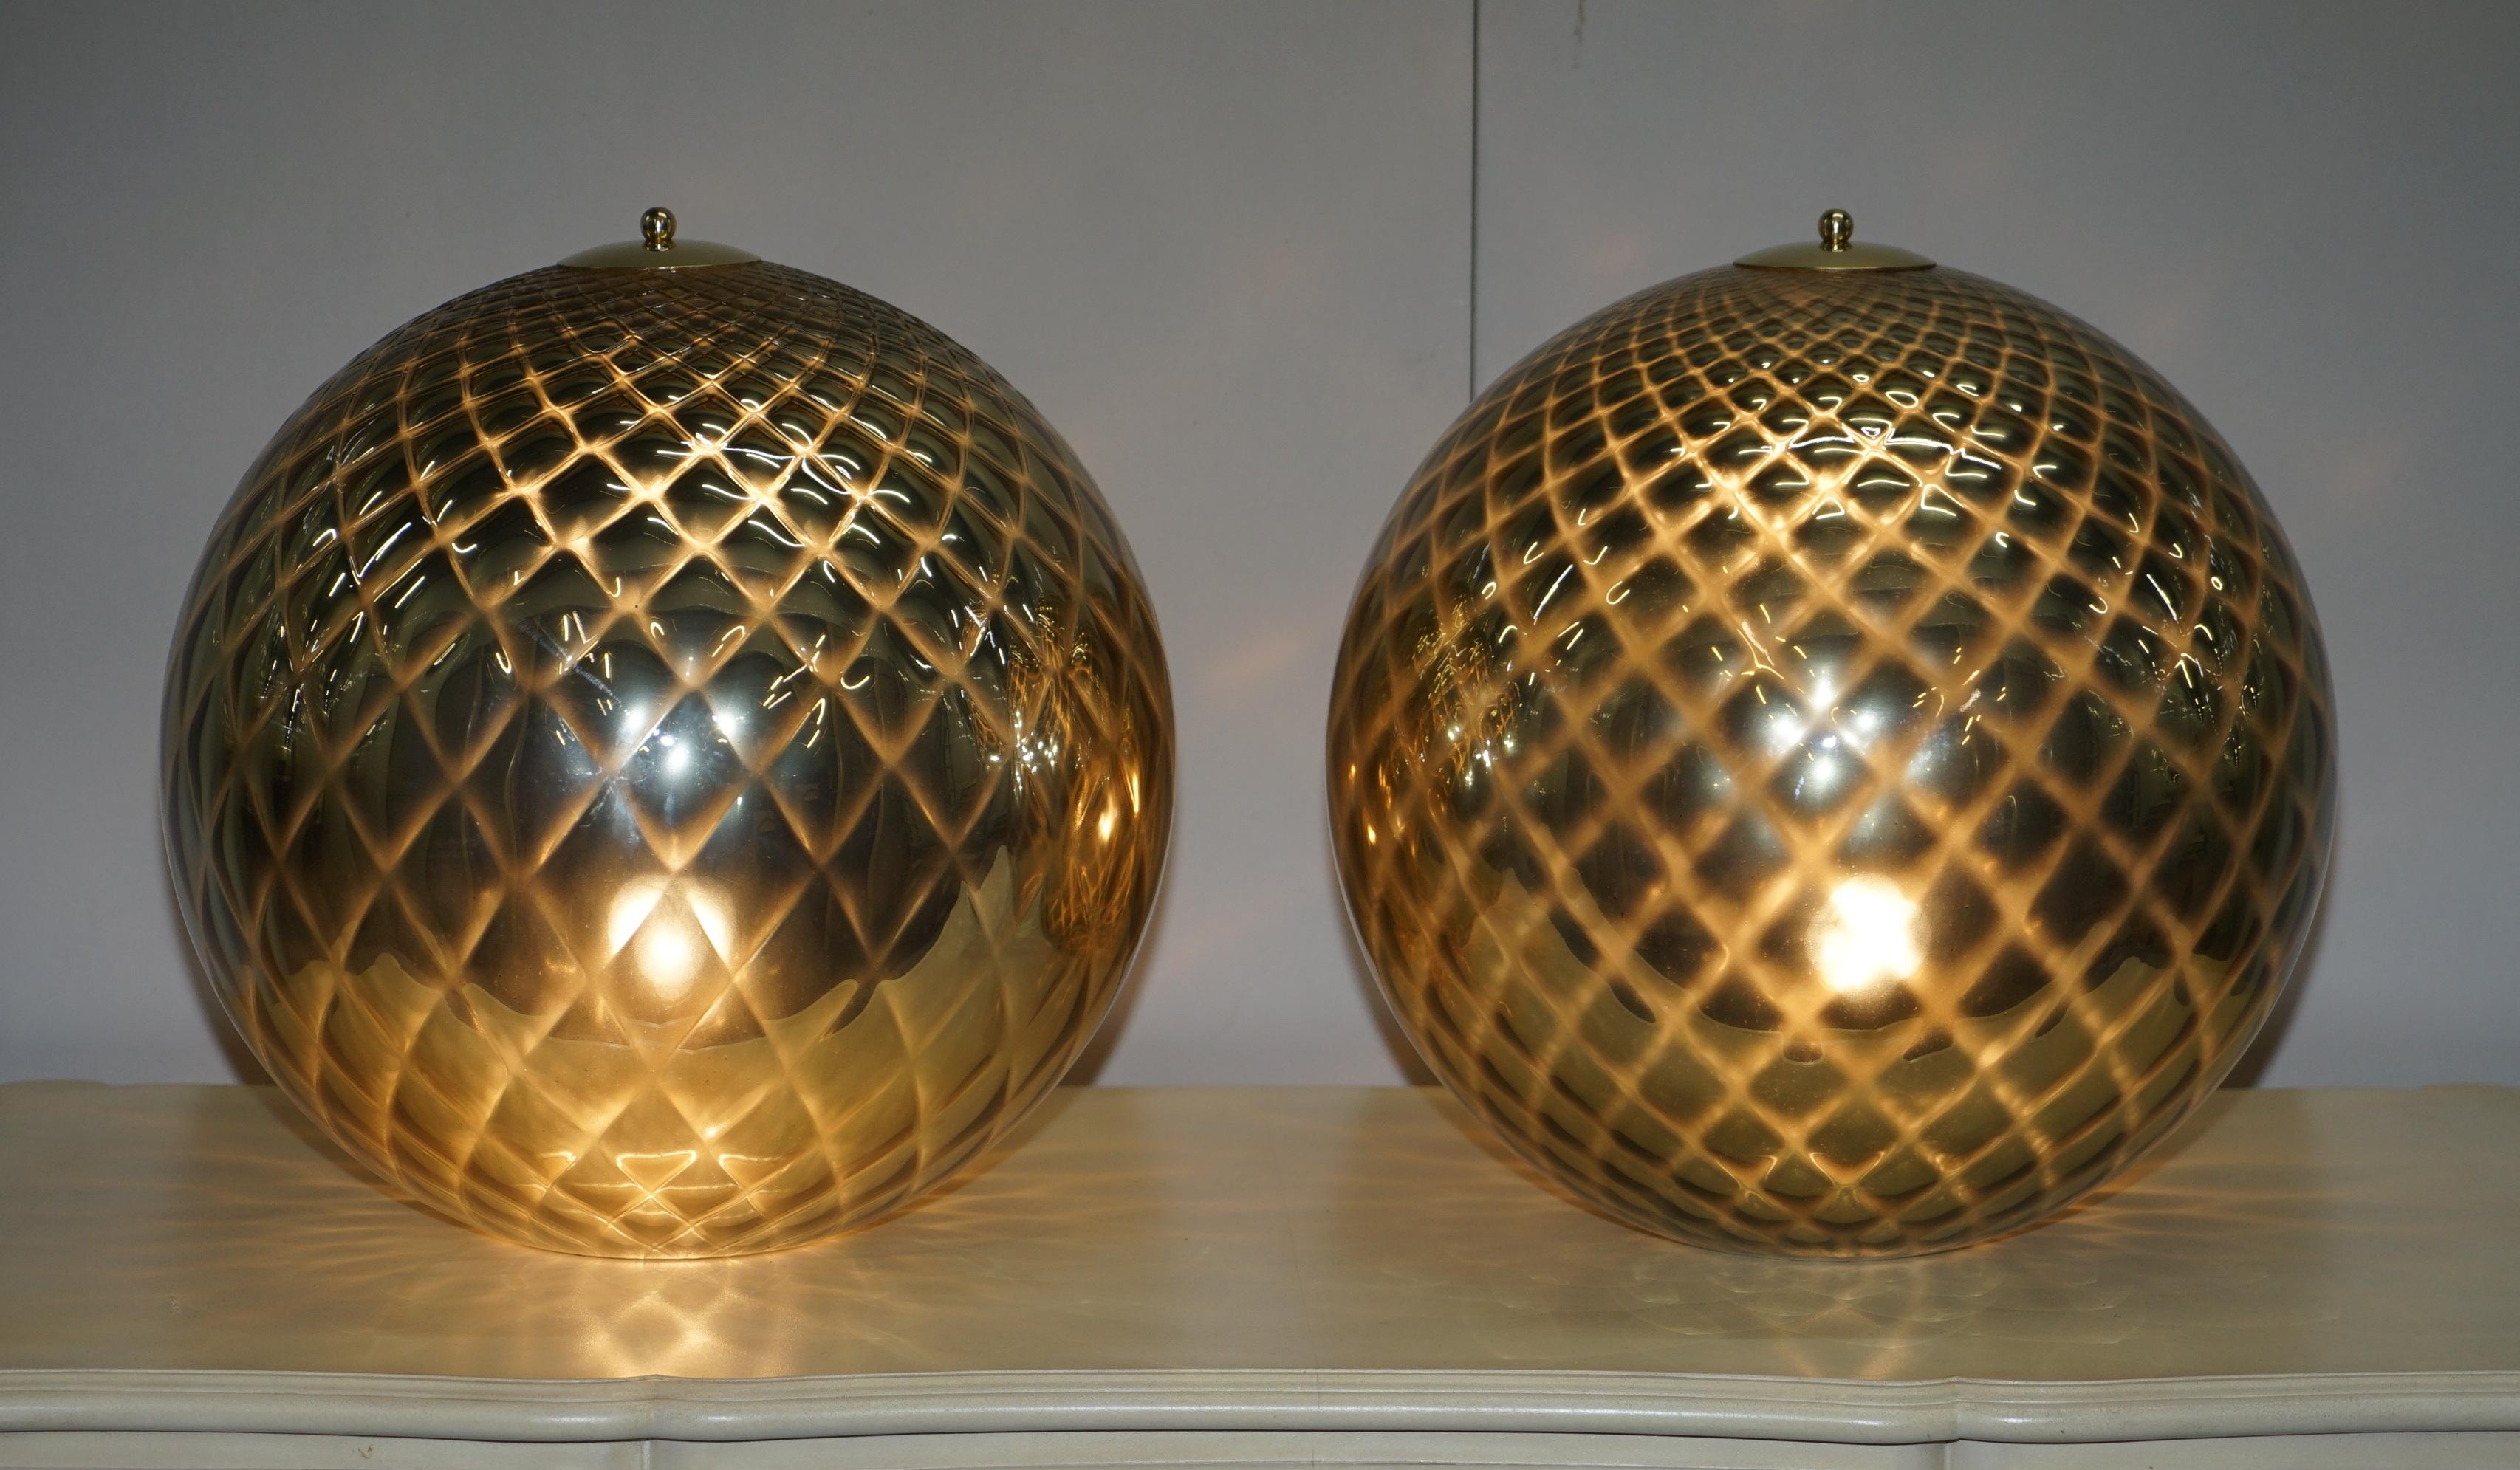 We are delighted to offer for sale this stunning pair of original Murano glass Diamond cut Sphere table lamps in gold

These lamps are part of a large selection of Murano lamps that have come straight from the Island of Murano directly to me, I